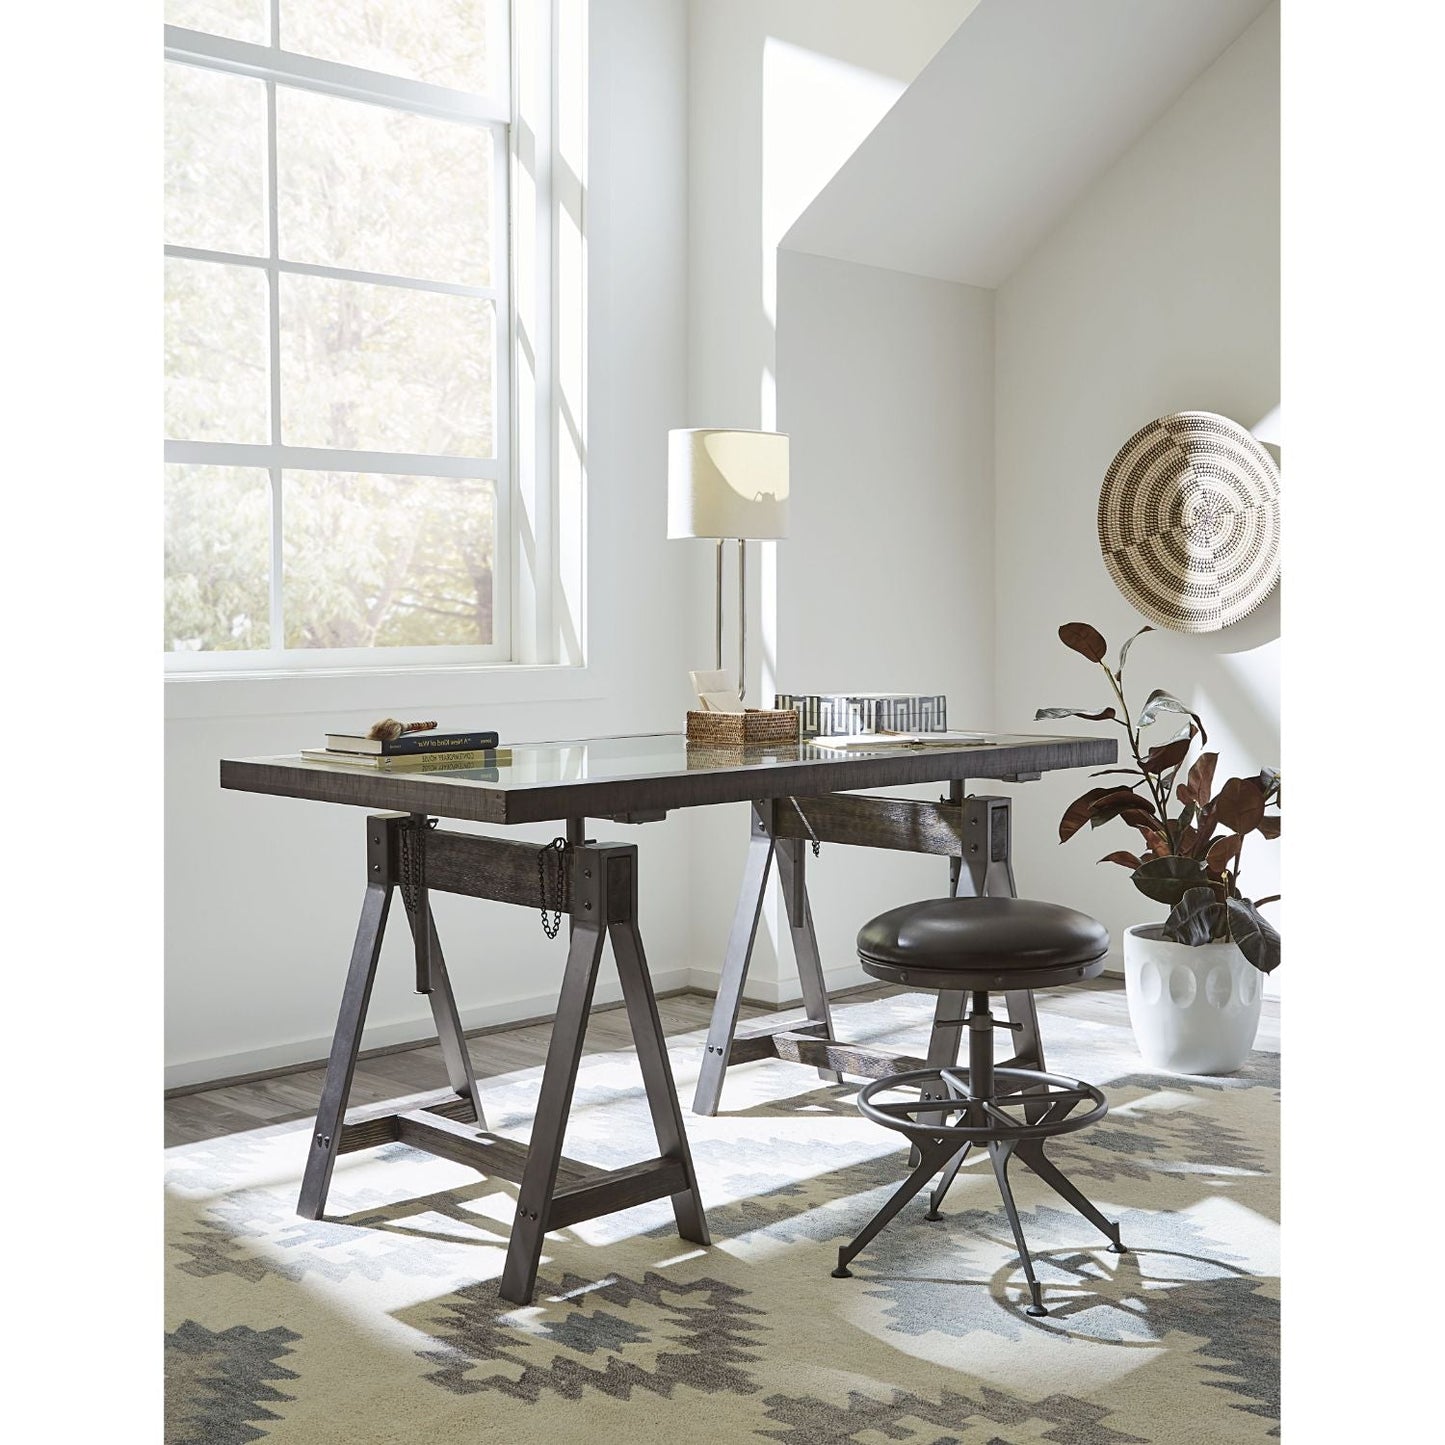 Modus Medici Desk Stool in Charcoal Brown